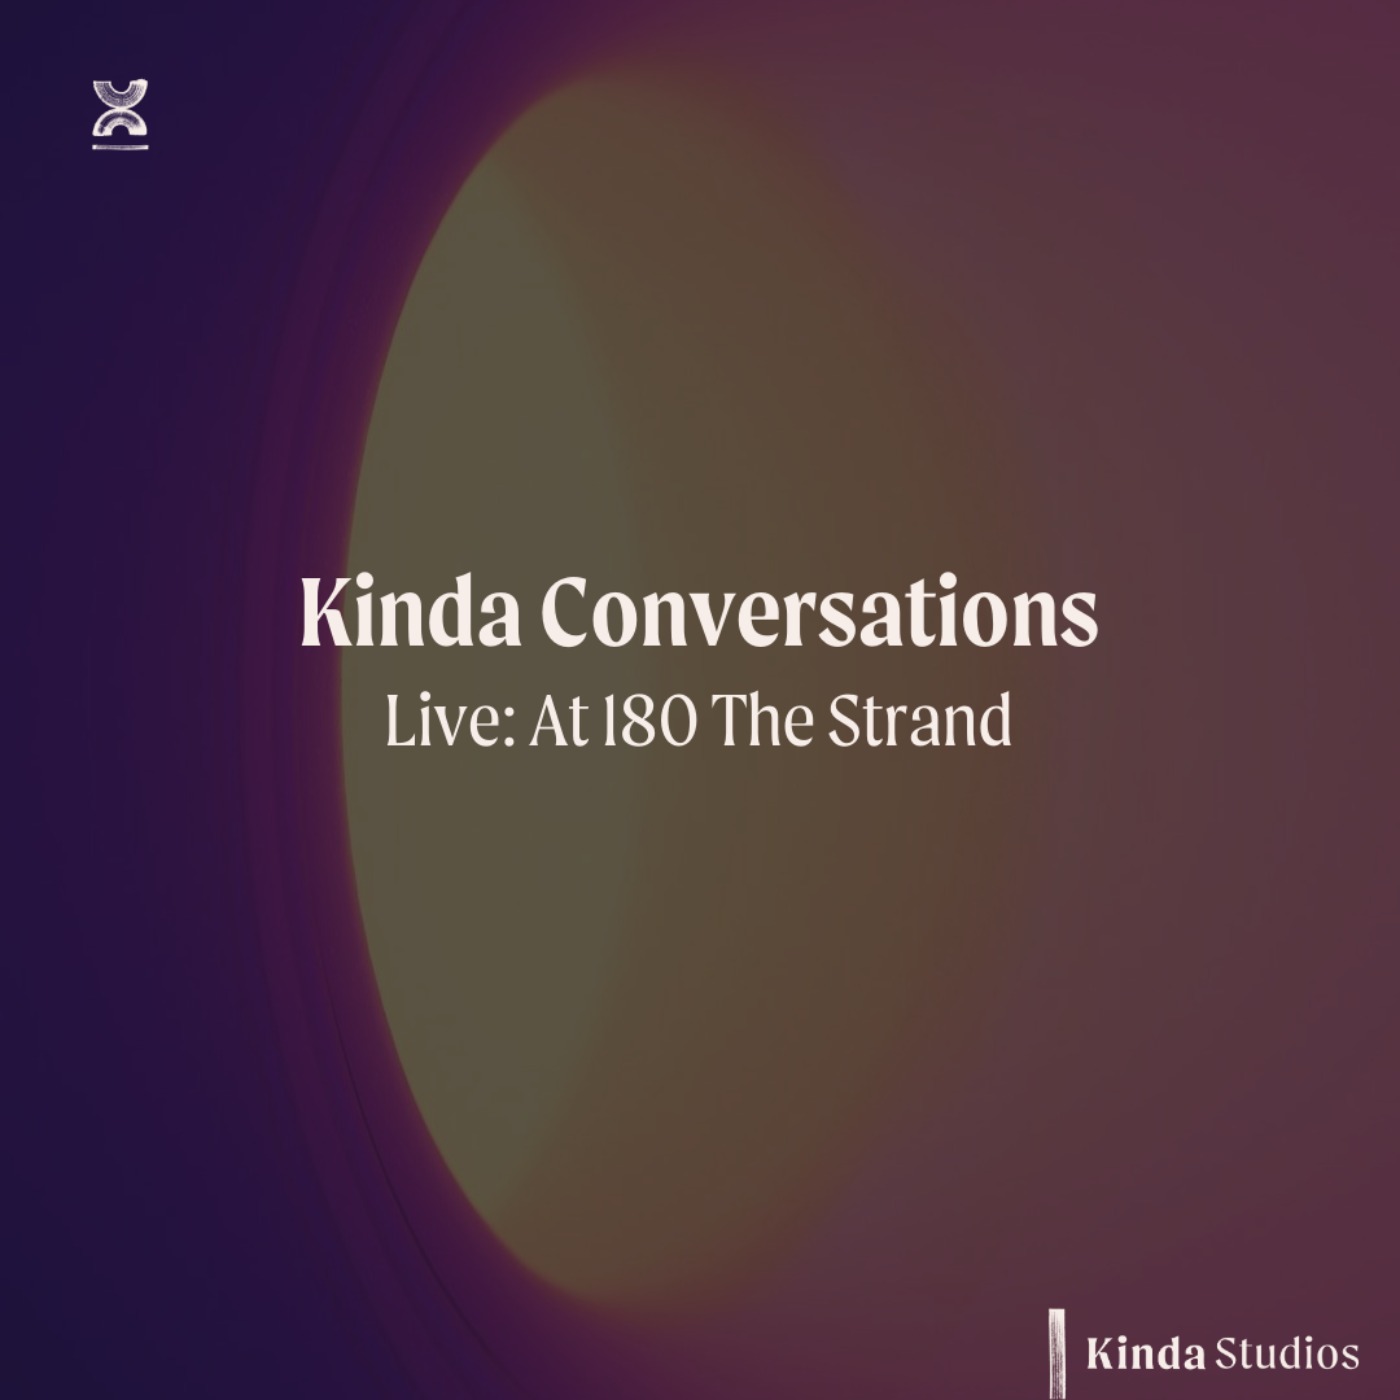 Kinda Conversations: Connection to Environment